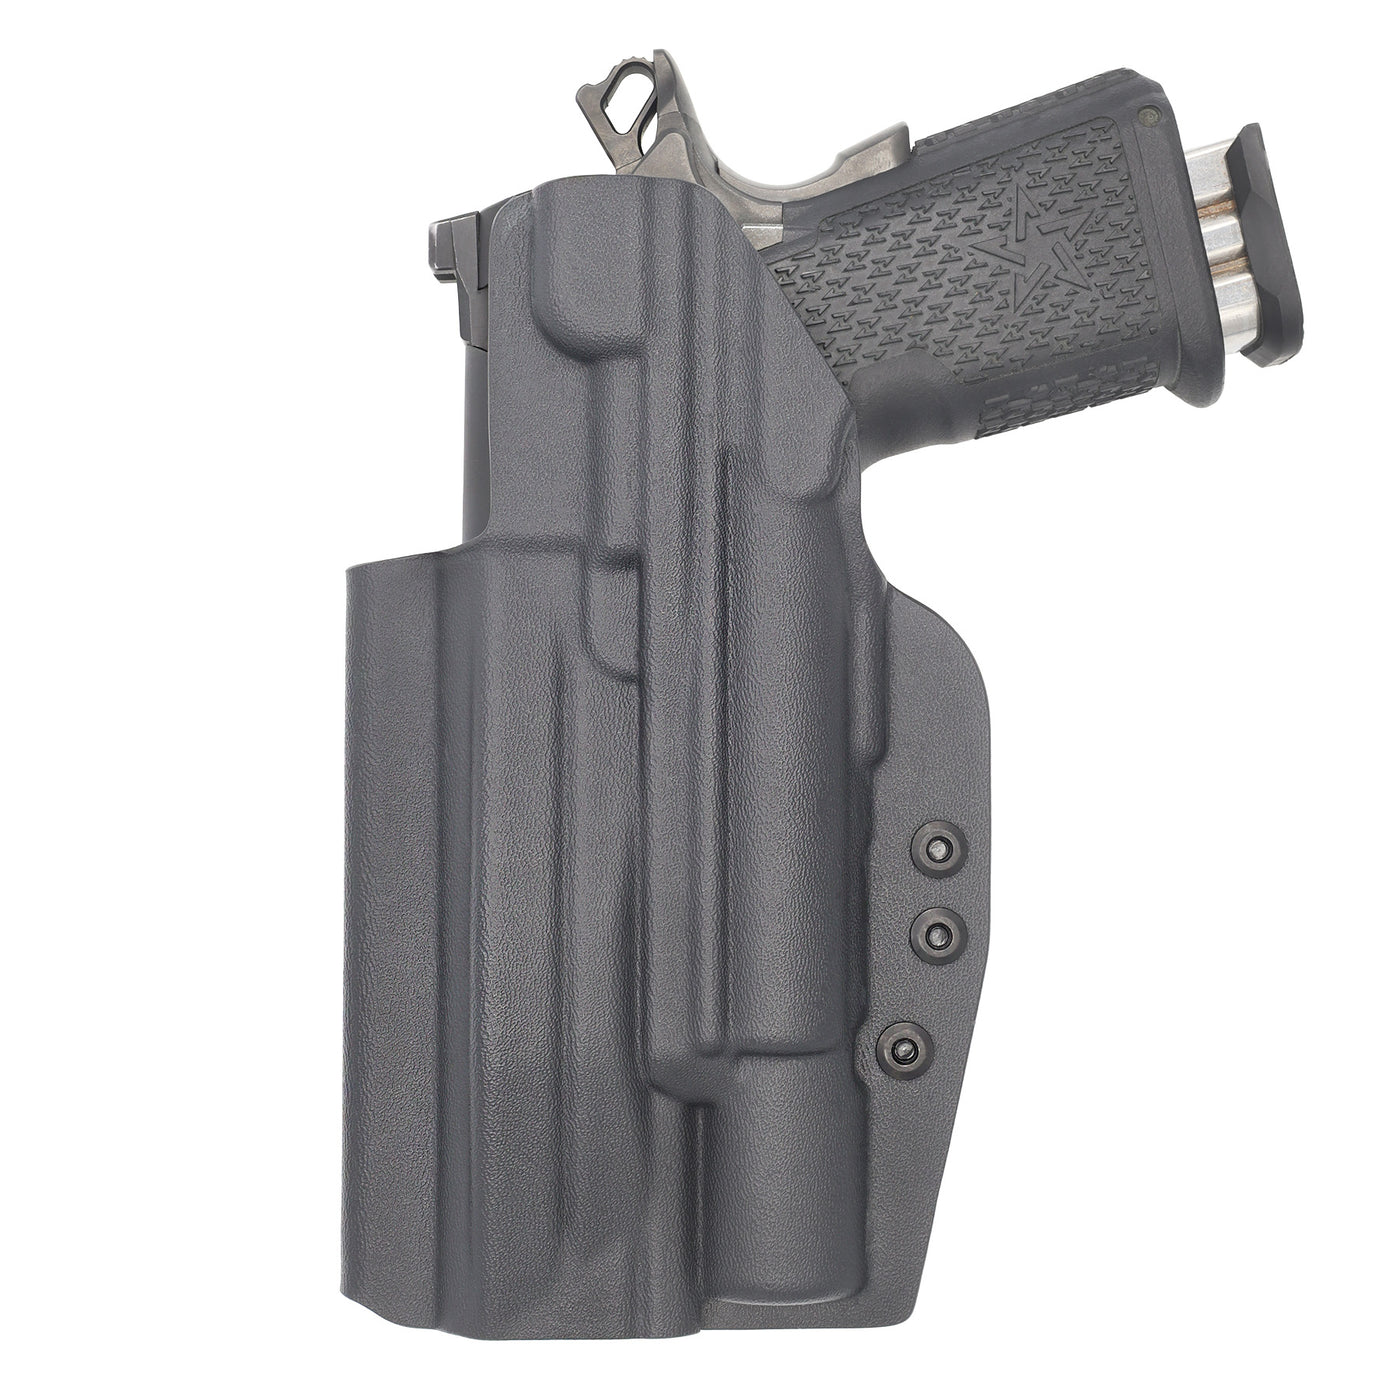 C&G Holsters Quickship IWB Tactical 1911 Surefire X300 in holstered position back view